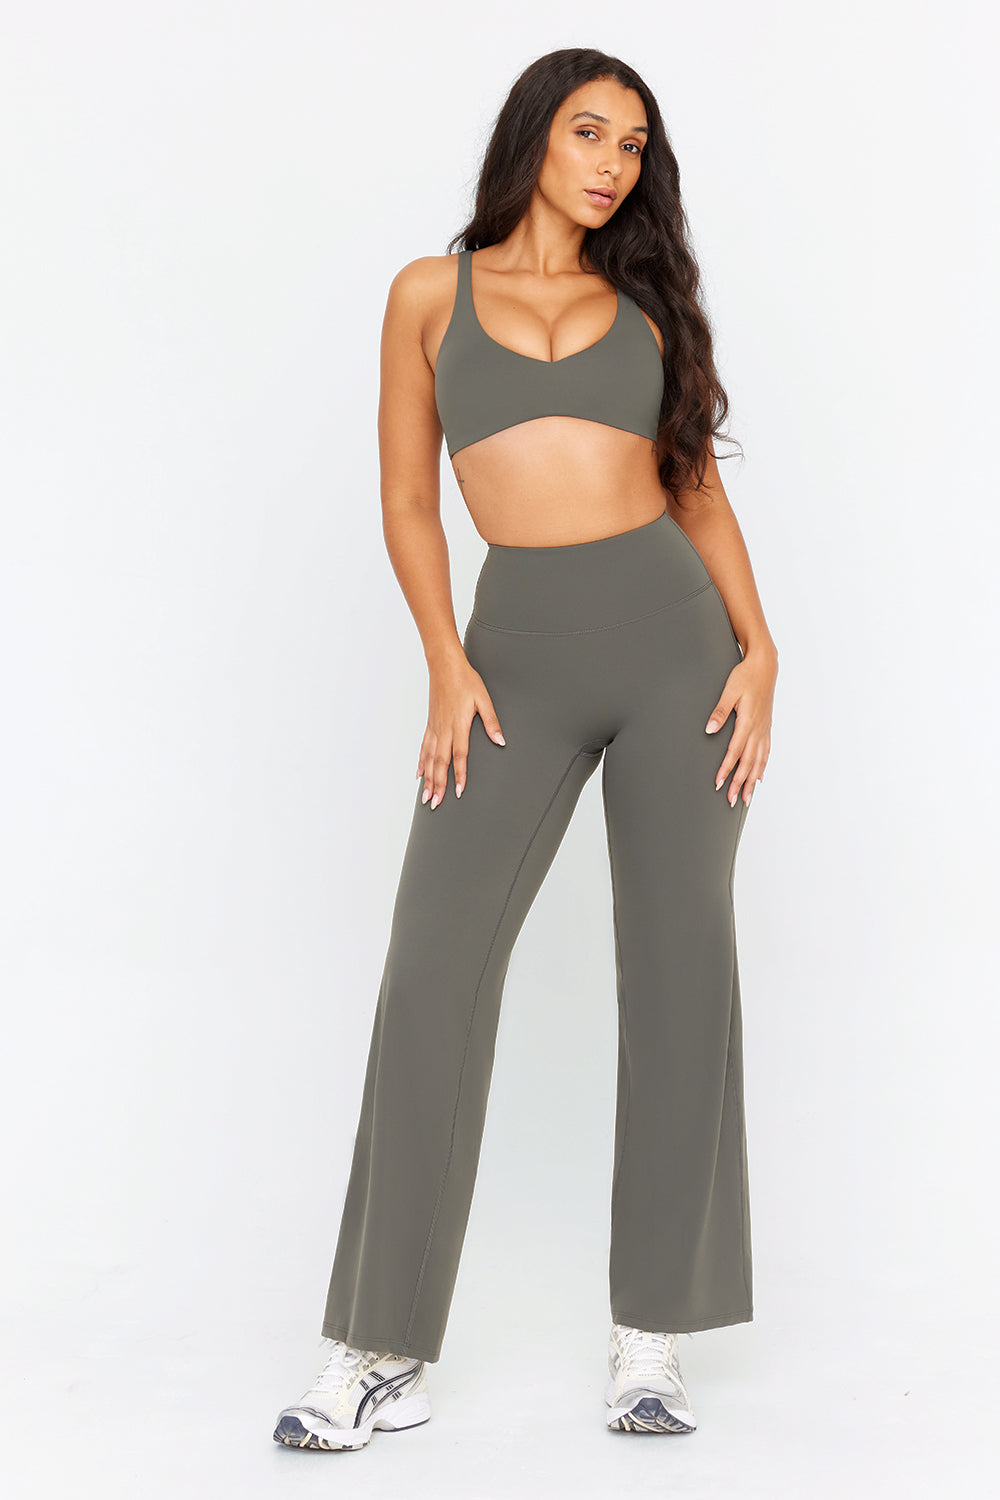 Fans are 'screaming' over viral brand TALA's new DayFlex collection -  Mirror Online